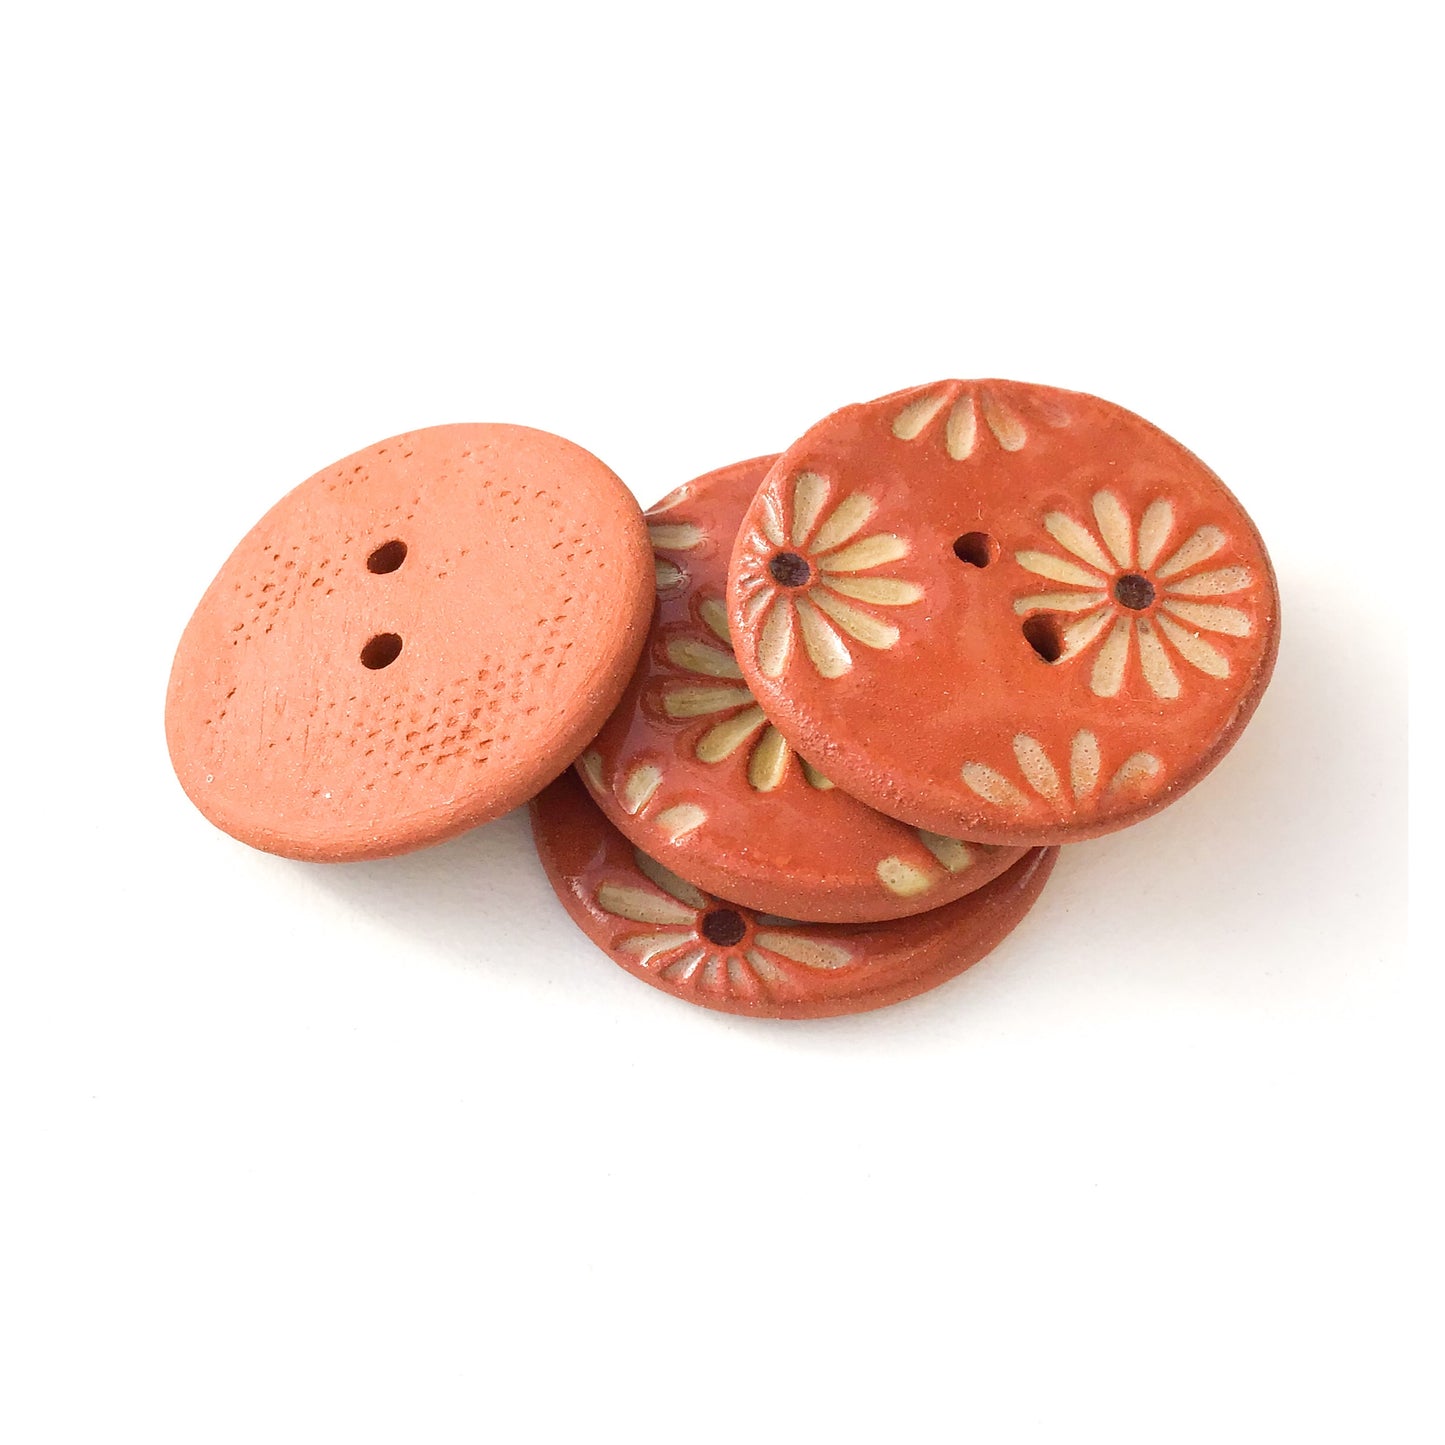 Gold Daisy Buttons on Red Clay - 1 1/16" - 4 Pack